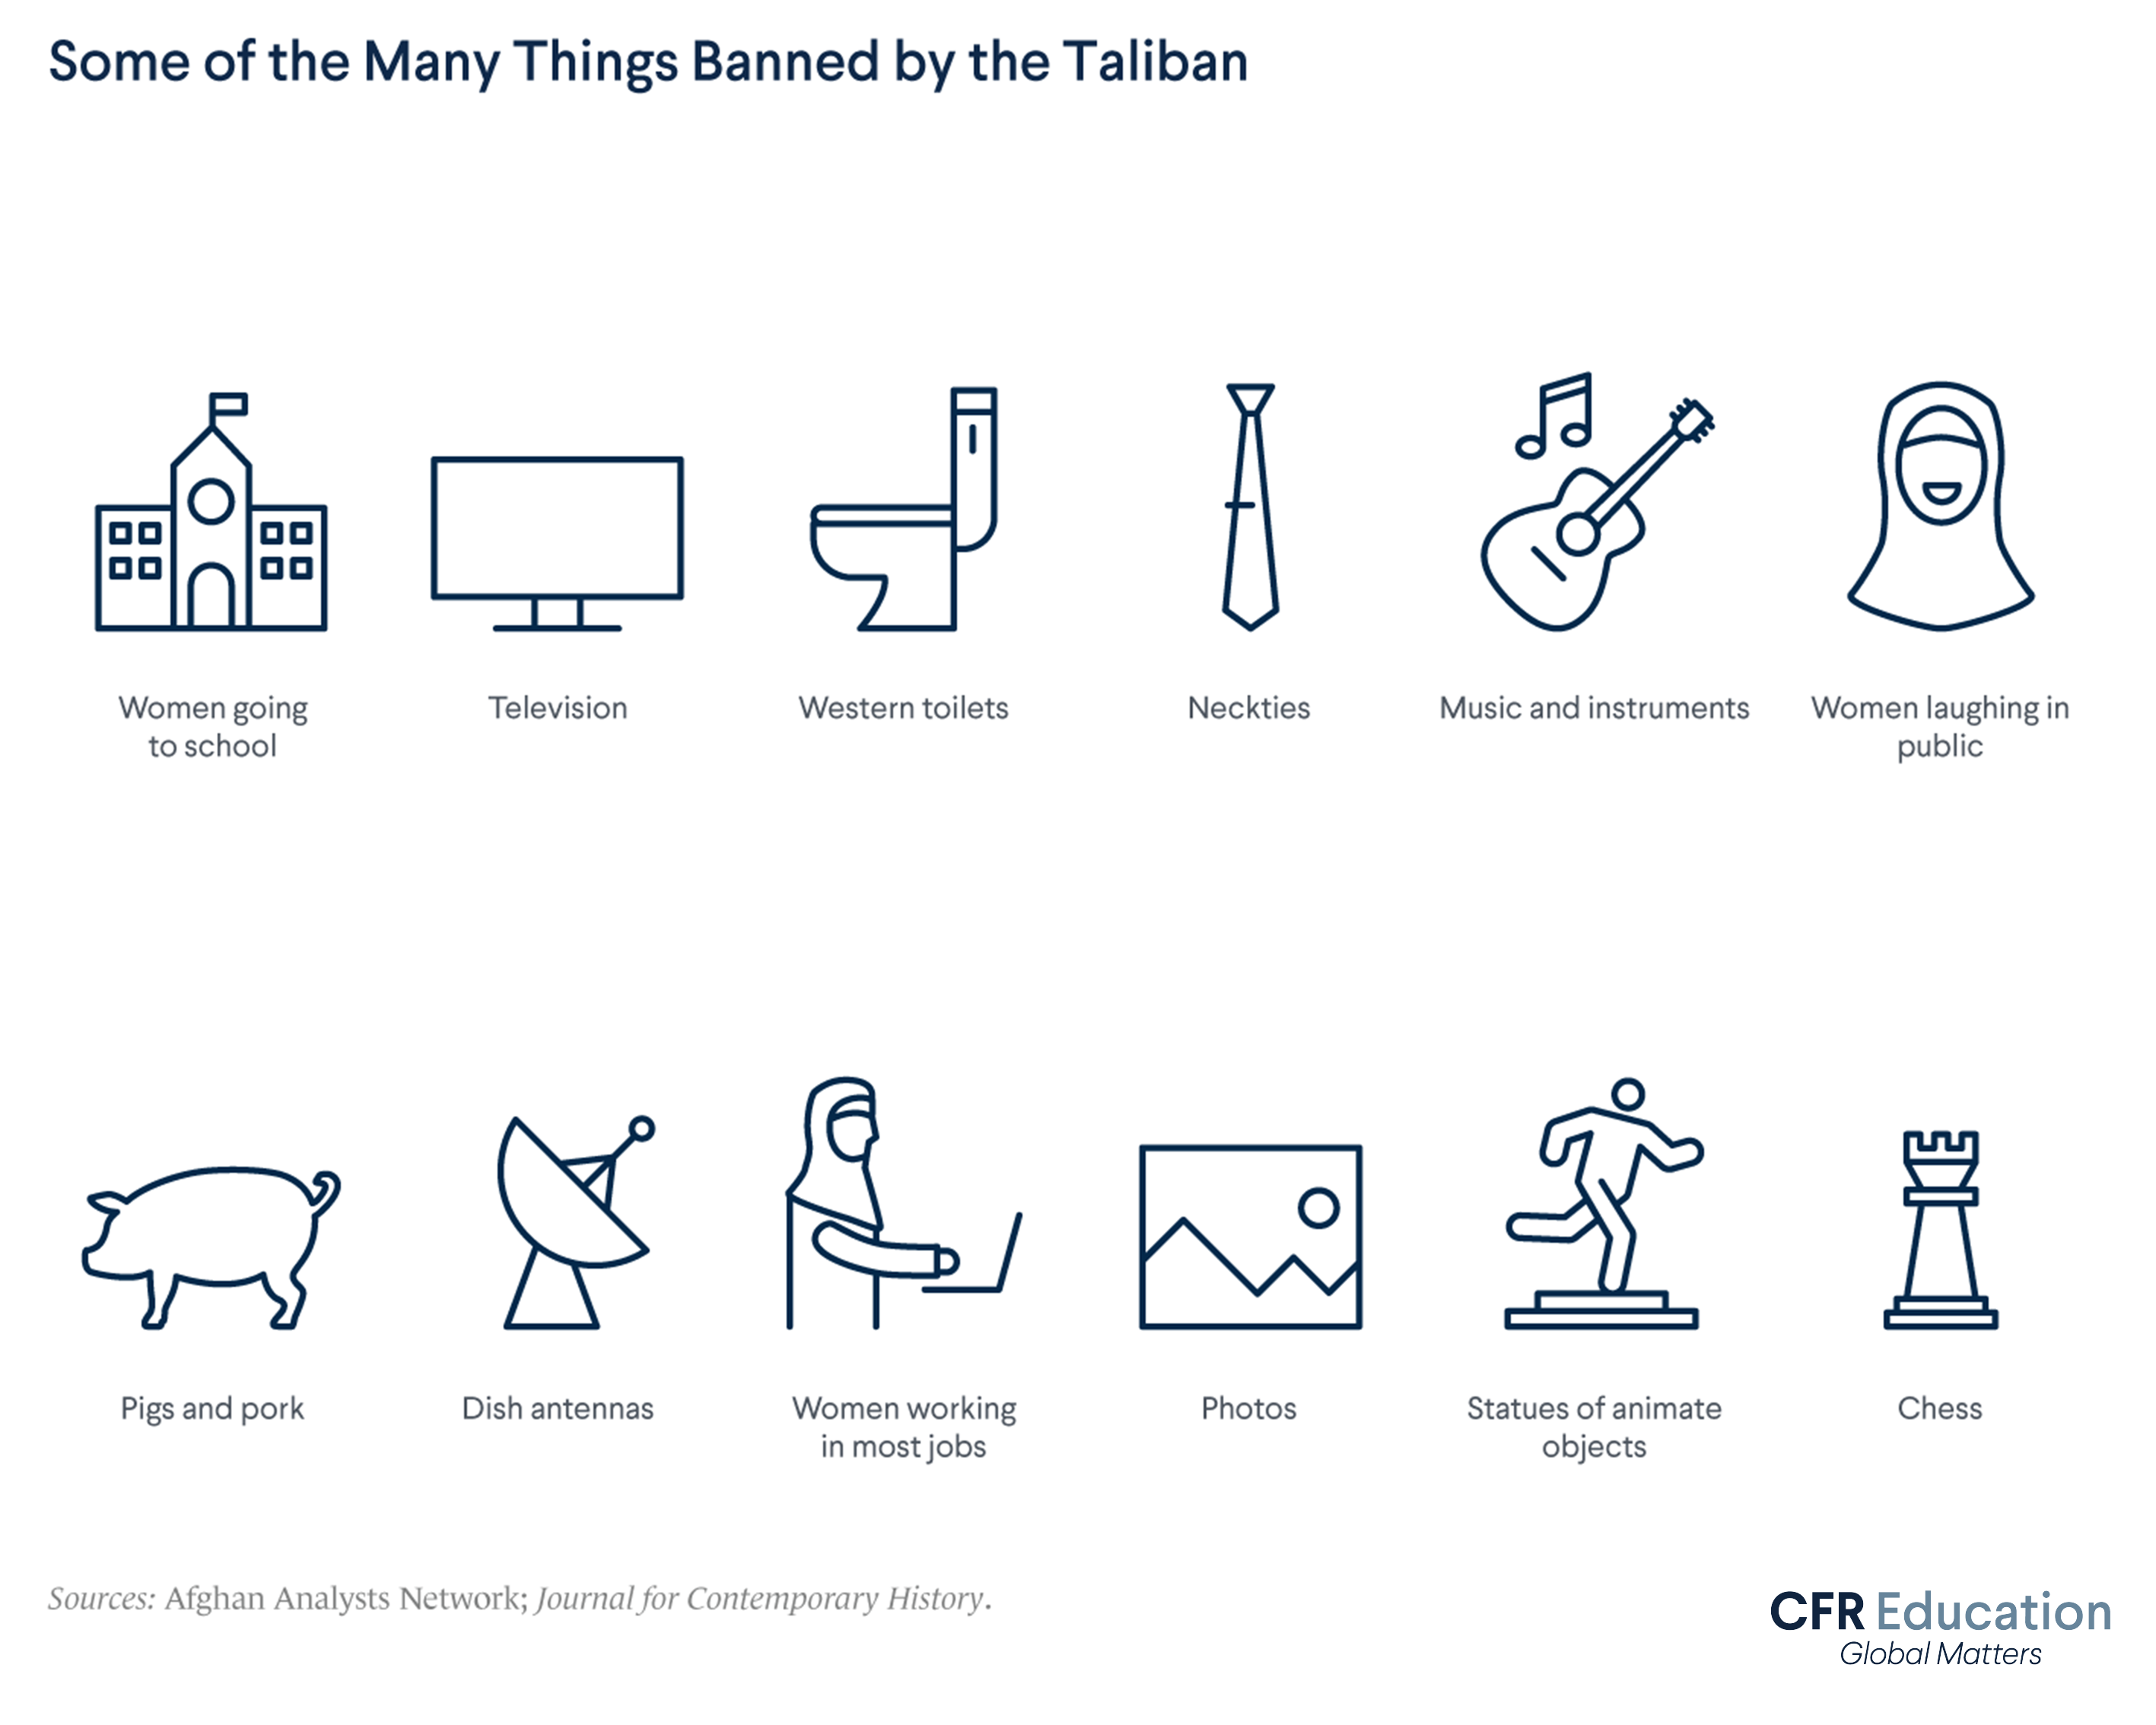 Infographic shows some of the things banned by the Taliban. Its Ministry of Virtue and Vice banned television and musical instruments and outlawed education for women. For more info contact us at cfr_education@cfr.org.